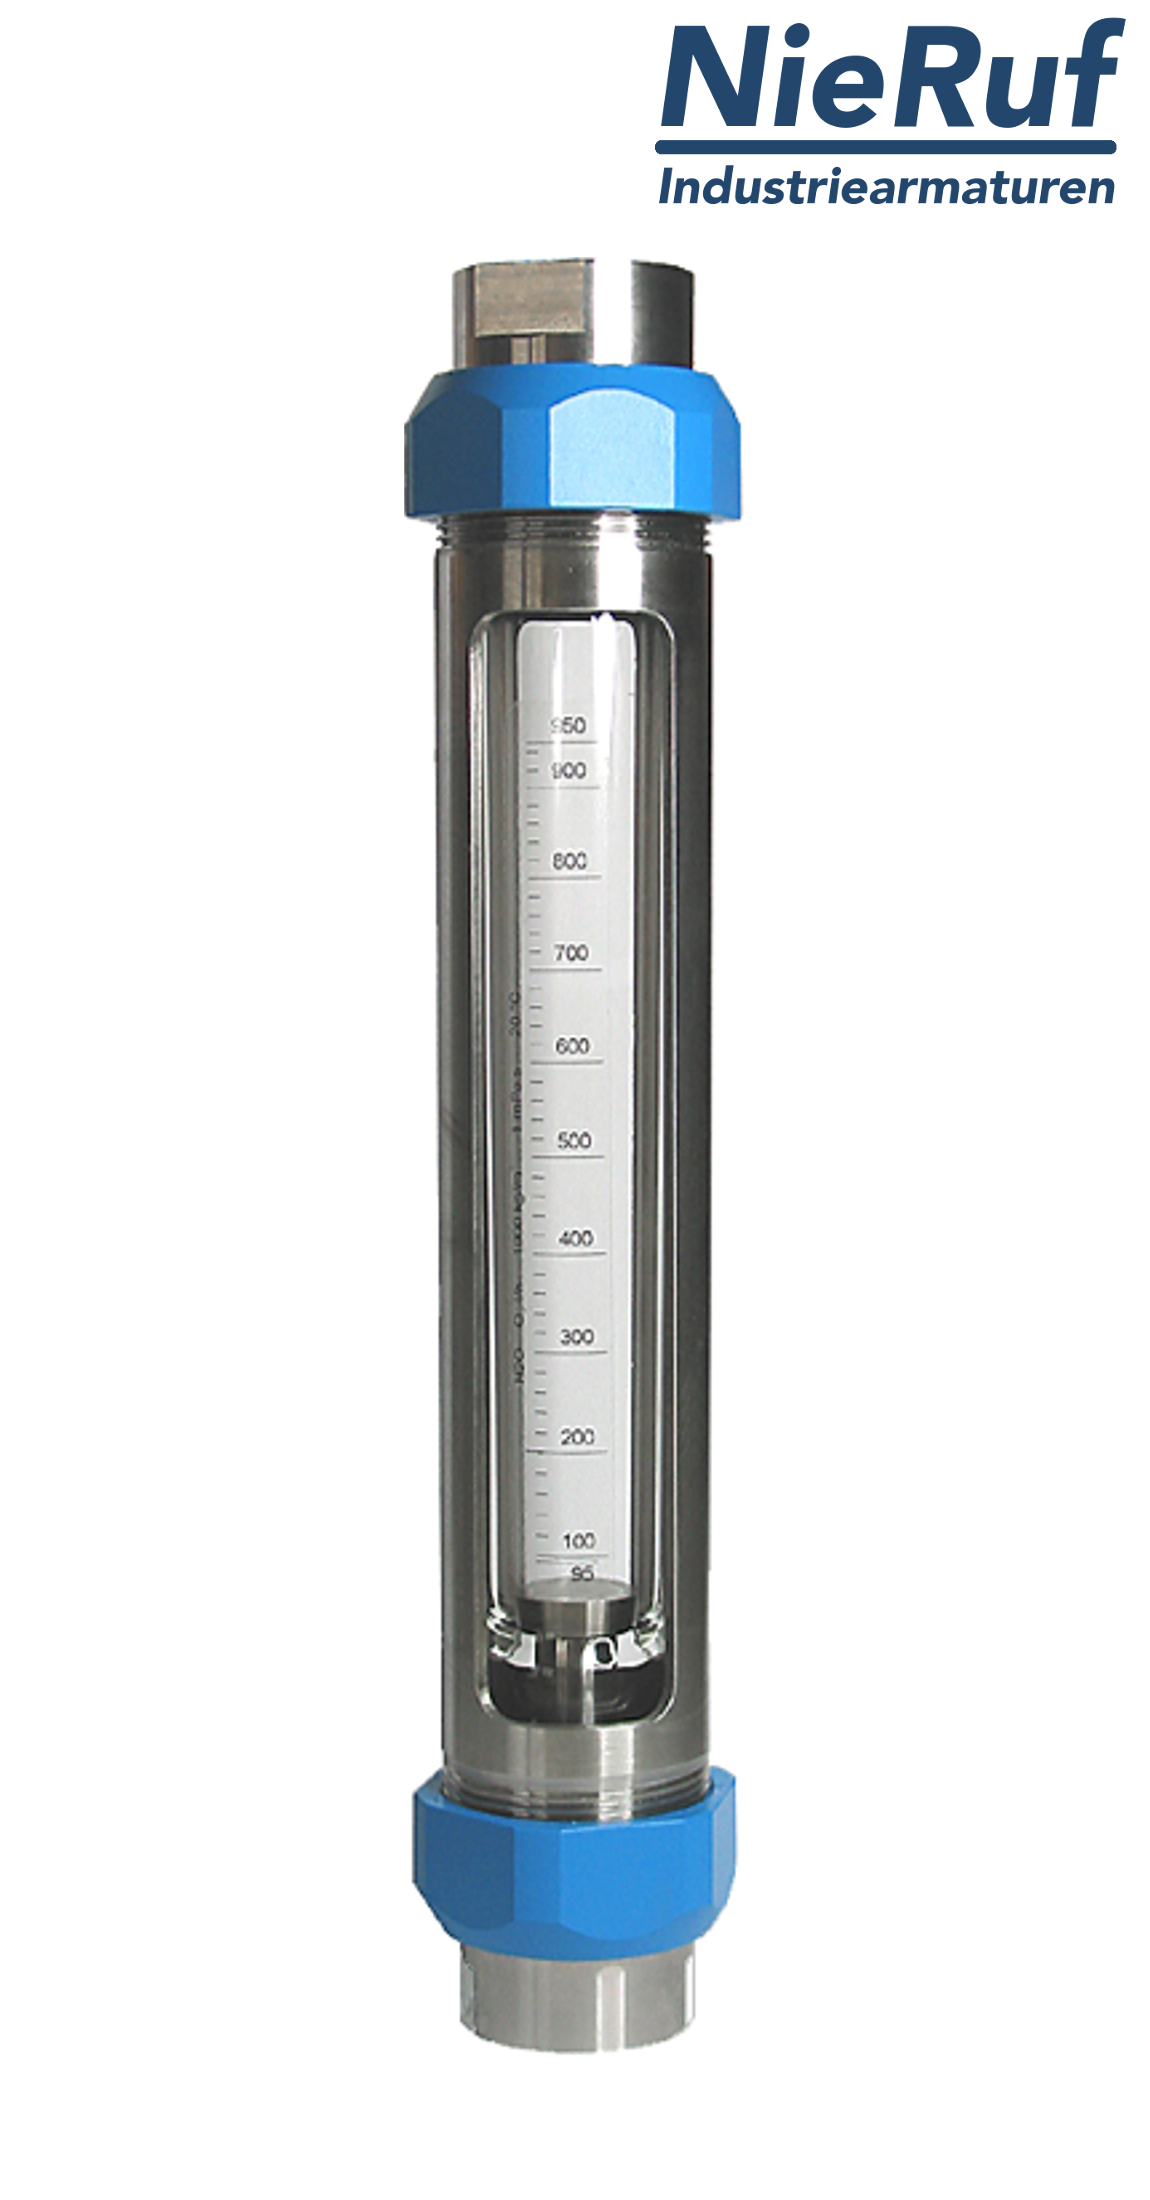 Variable area flowmeter stainless steel + borosilicate 3/4" inch 1600.0 - 16000.0 l/h air FKM